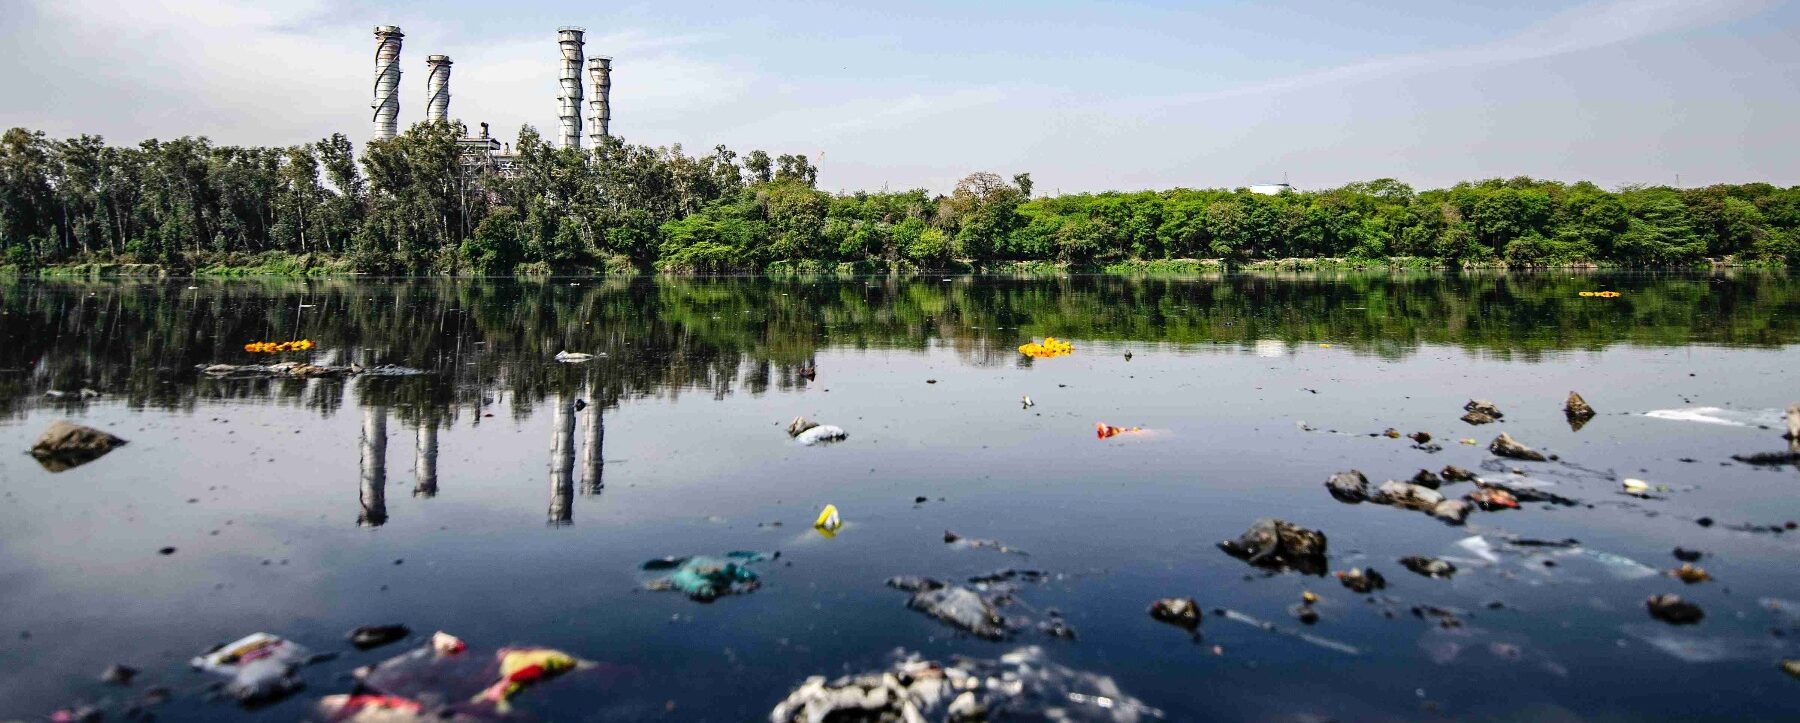 water pollution by fast fashion industory